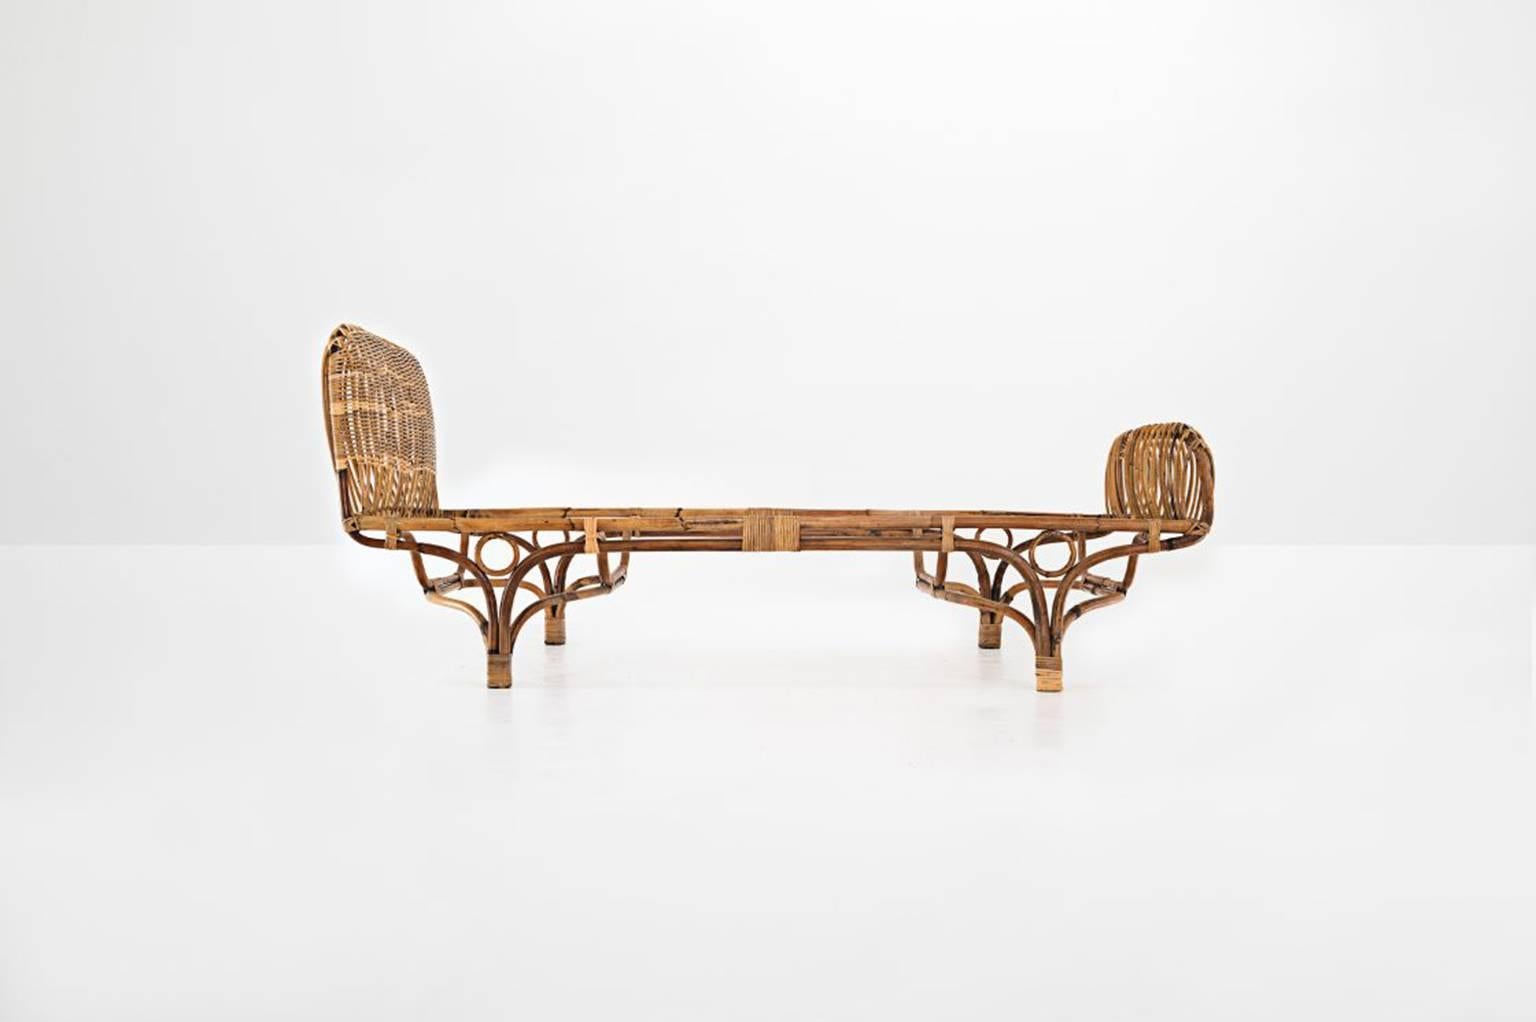 Design by Franco Albini (1905-1977) and Franca Helg

Bed model “677”
Manufactured by Bonacina
Italy, 1959
Rattan, rush
20th Century Italian Design. 

Measurements
204 cm x 90 cm x 90 cm height
80.3 in x 35.43 in x 35.43 in height

Literature
G.